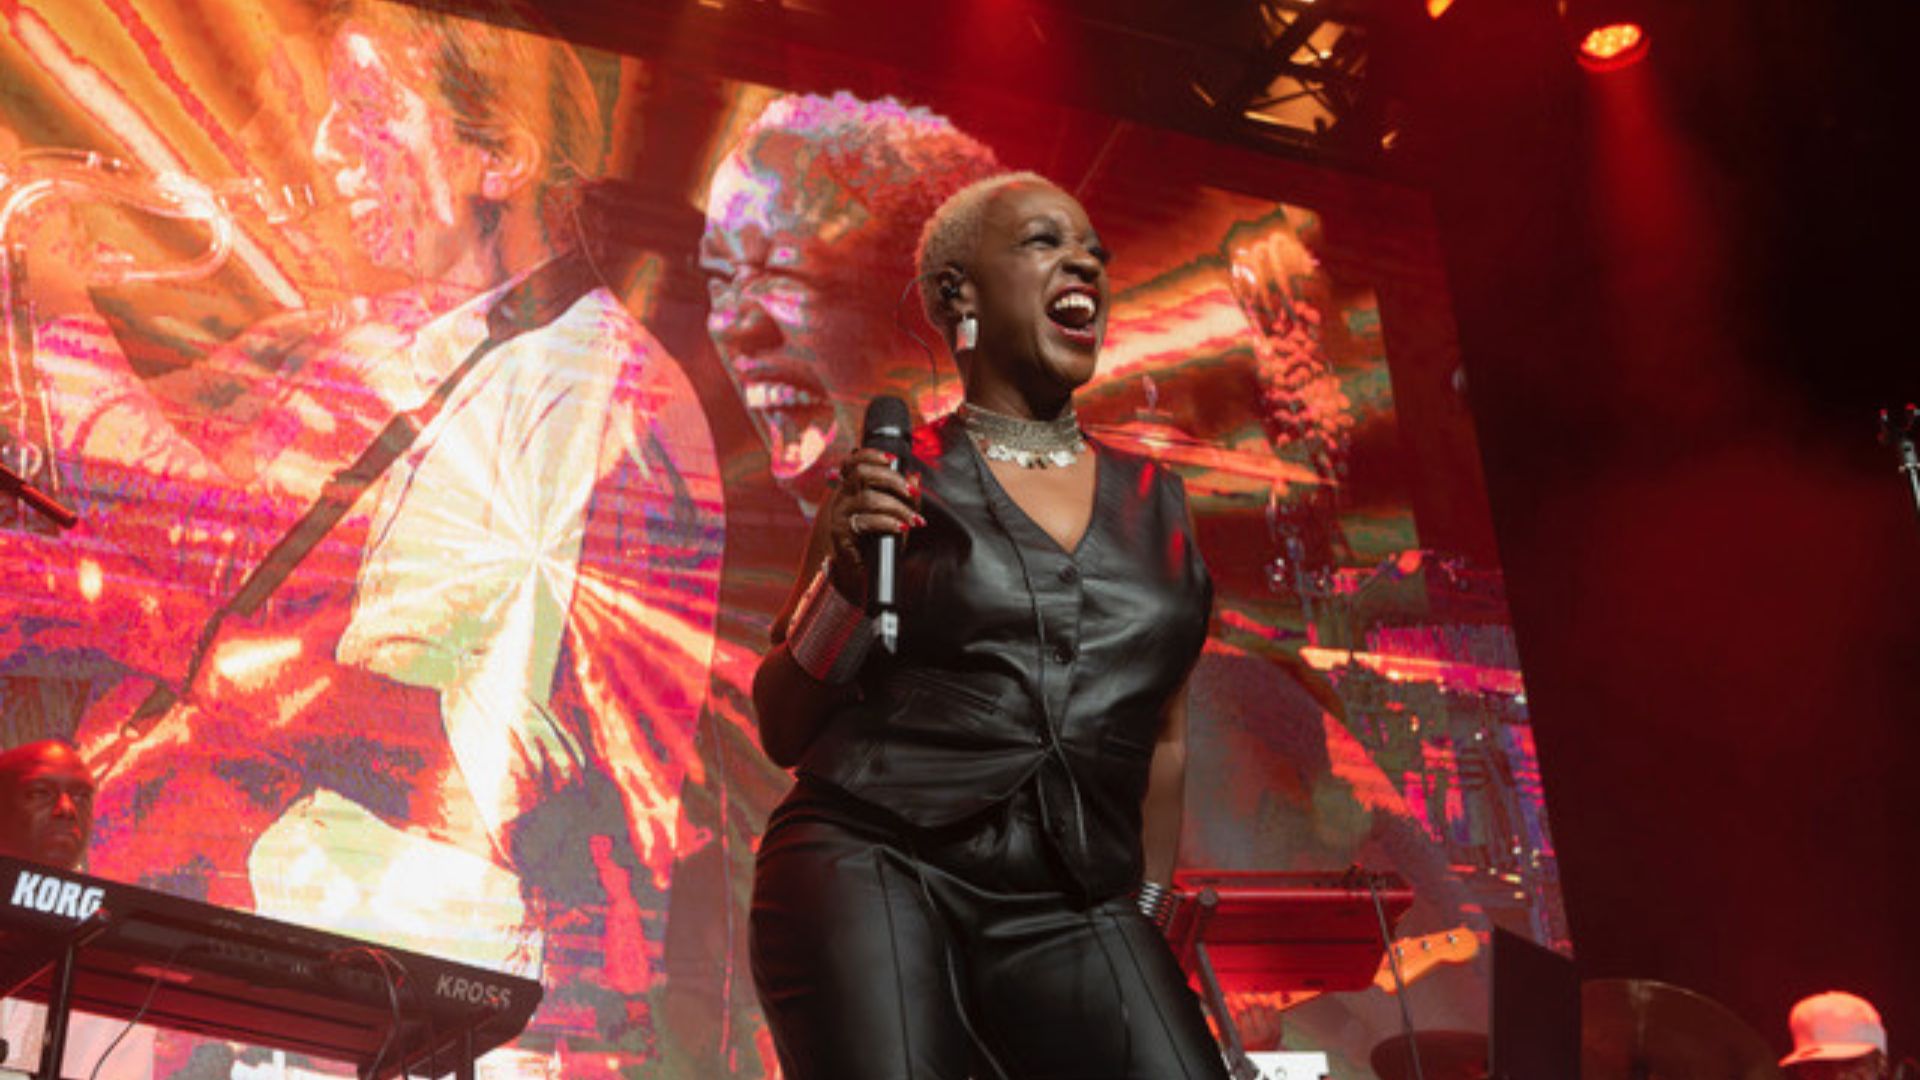 Female singer in Black Leather trousers and waistcoat with digital screen of her singing in the background